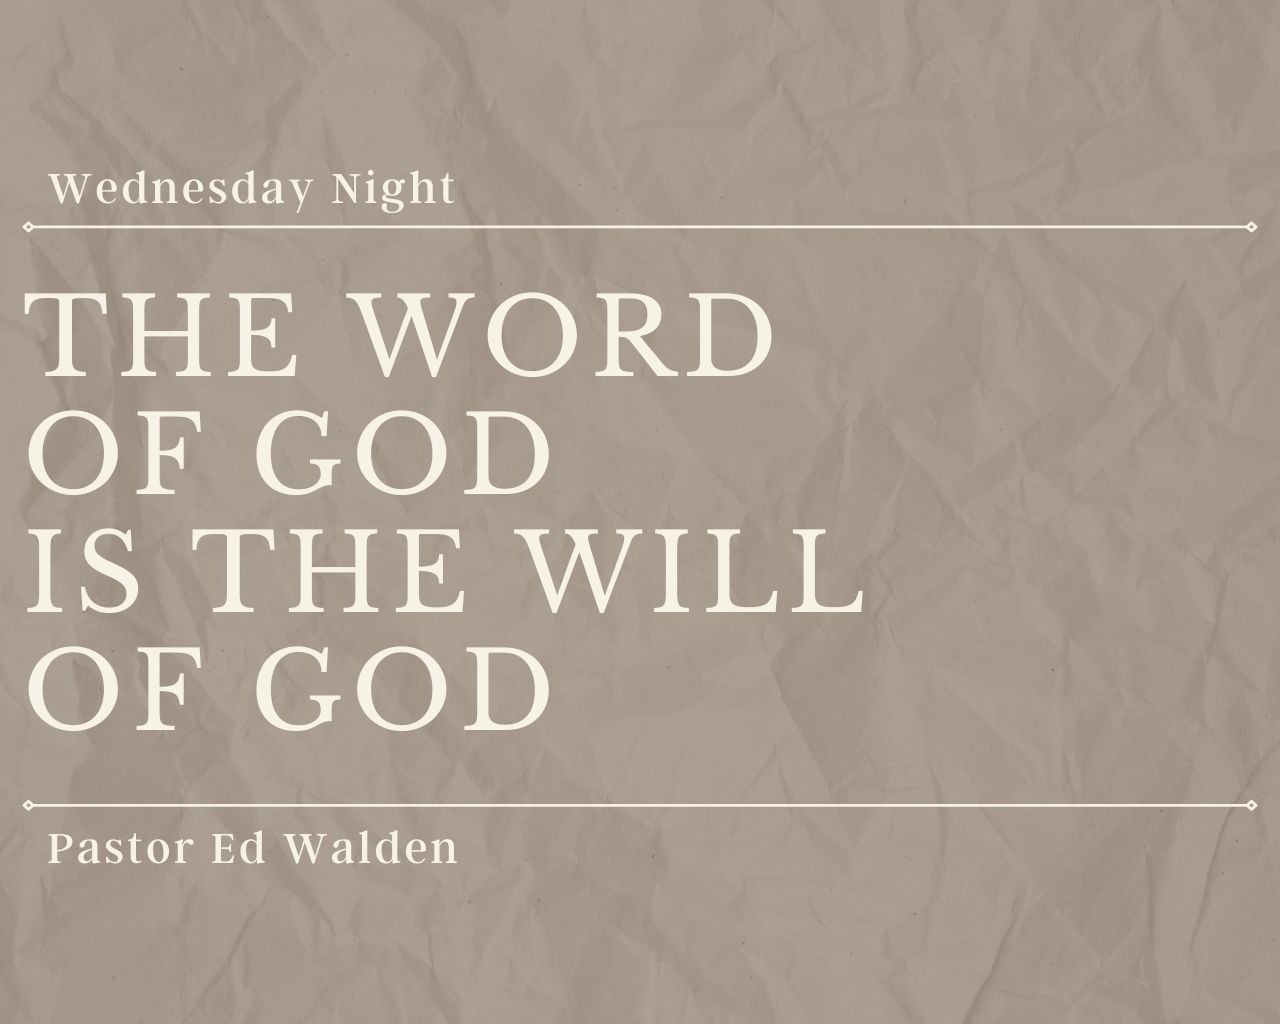 The Word of God is the Will of God